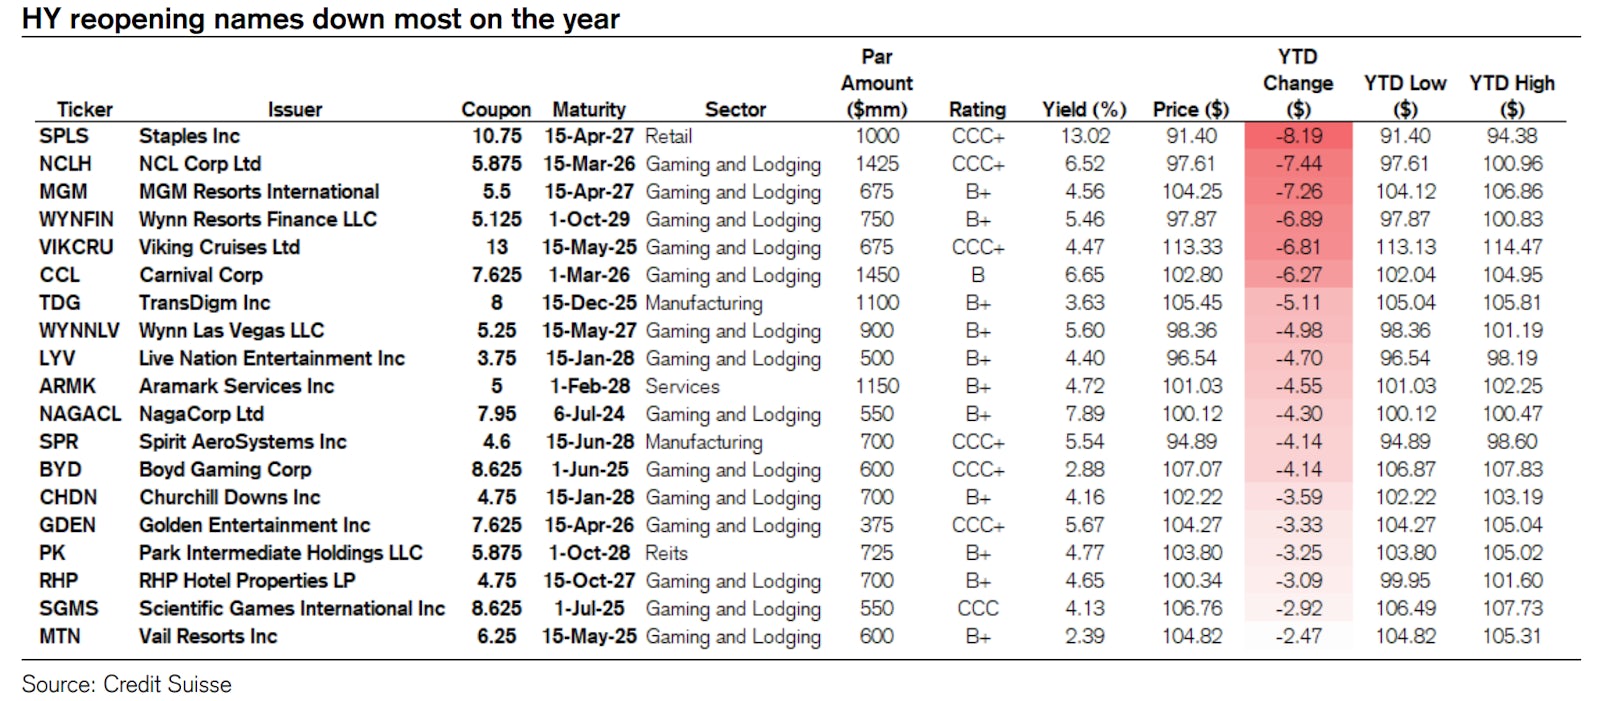 List of High Yield Reopening Names Most Down YTD | Source: Credit Suisse